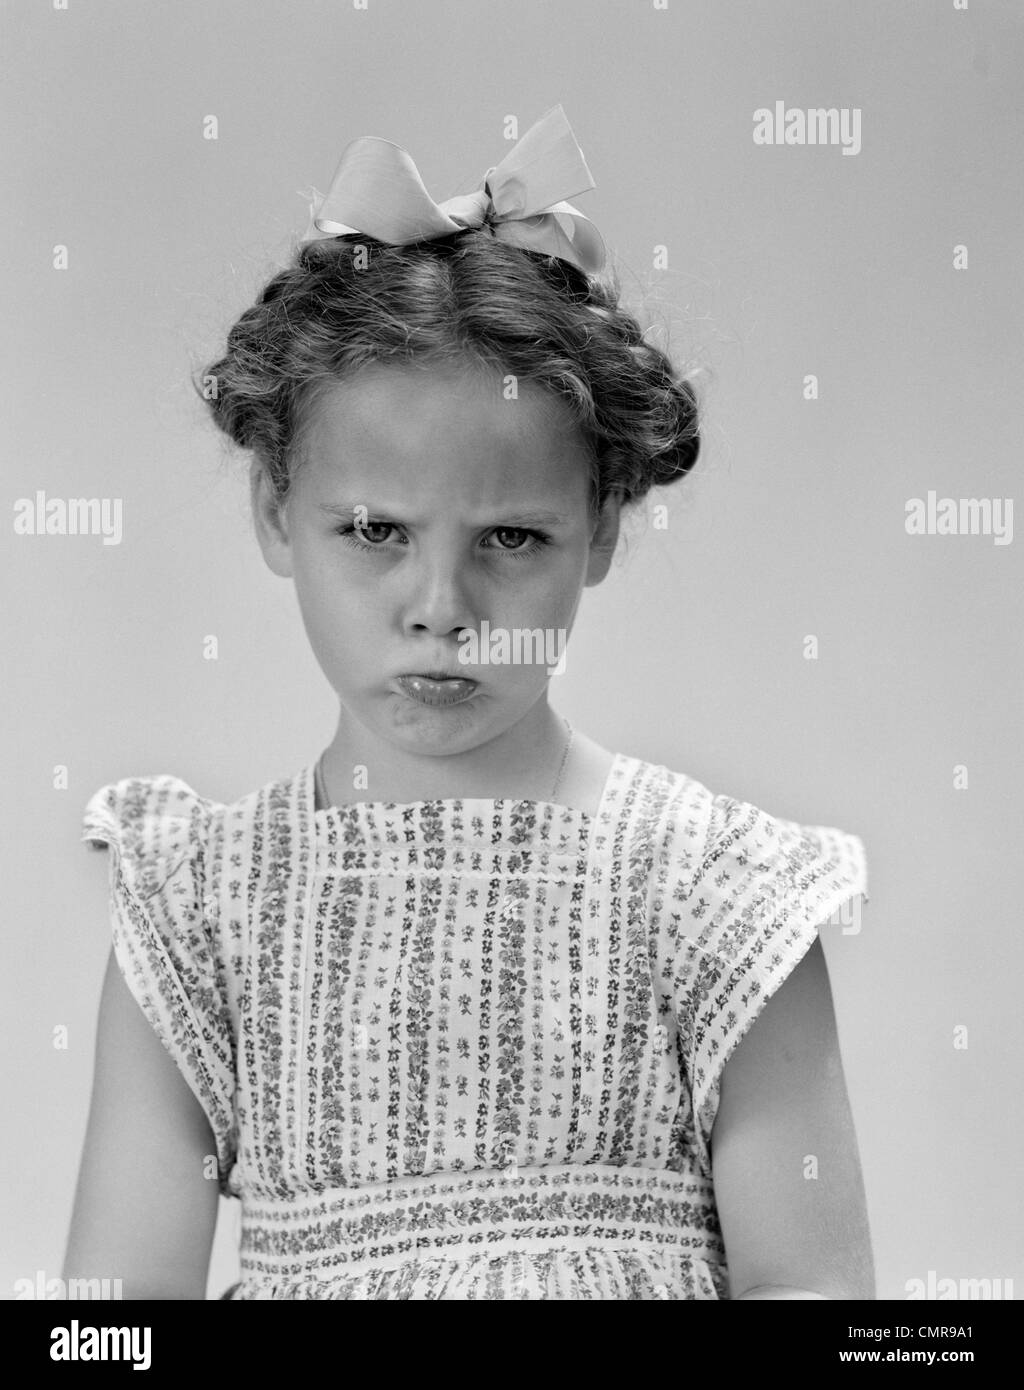 1940s LITTLE GIRL LOOKING SAD POUTING FROWNING LOOKING AT CAMERA Stock Photo